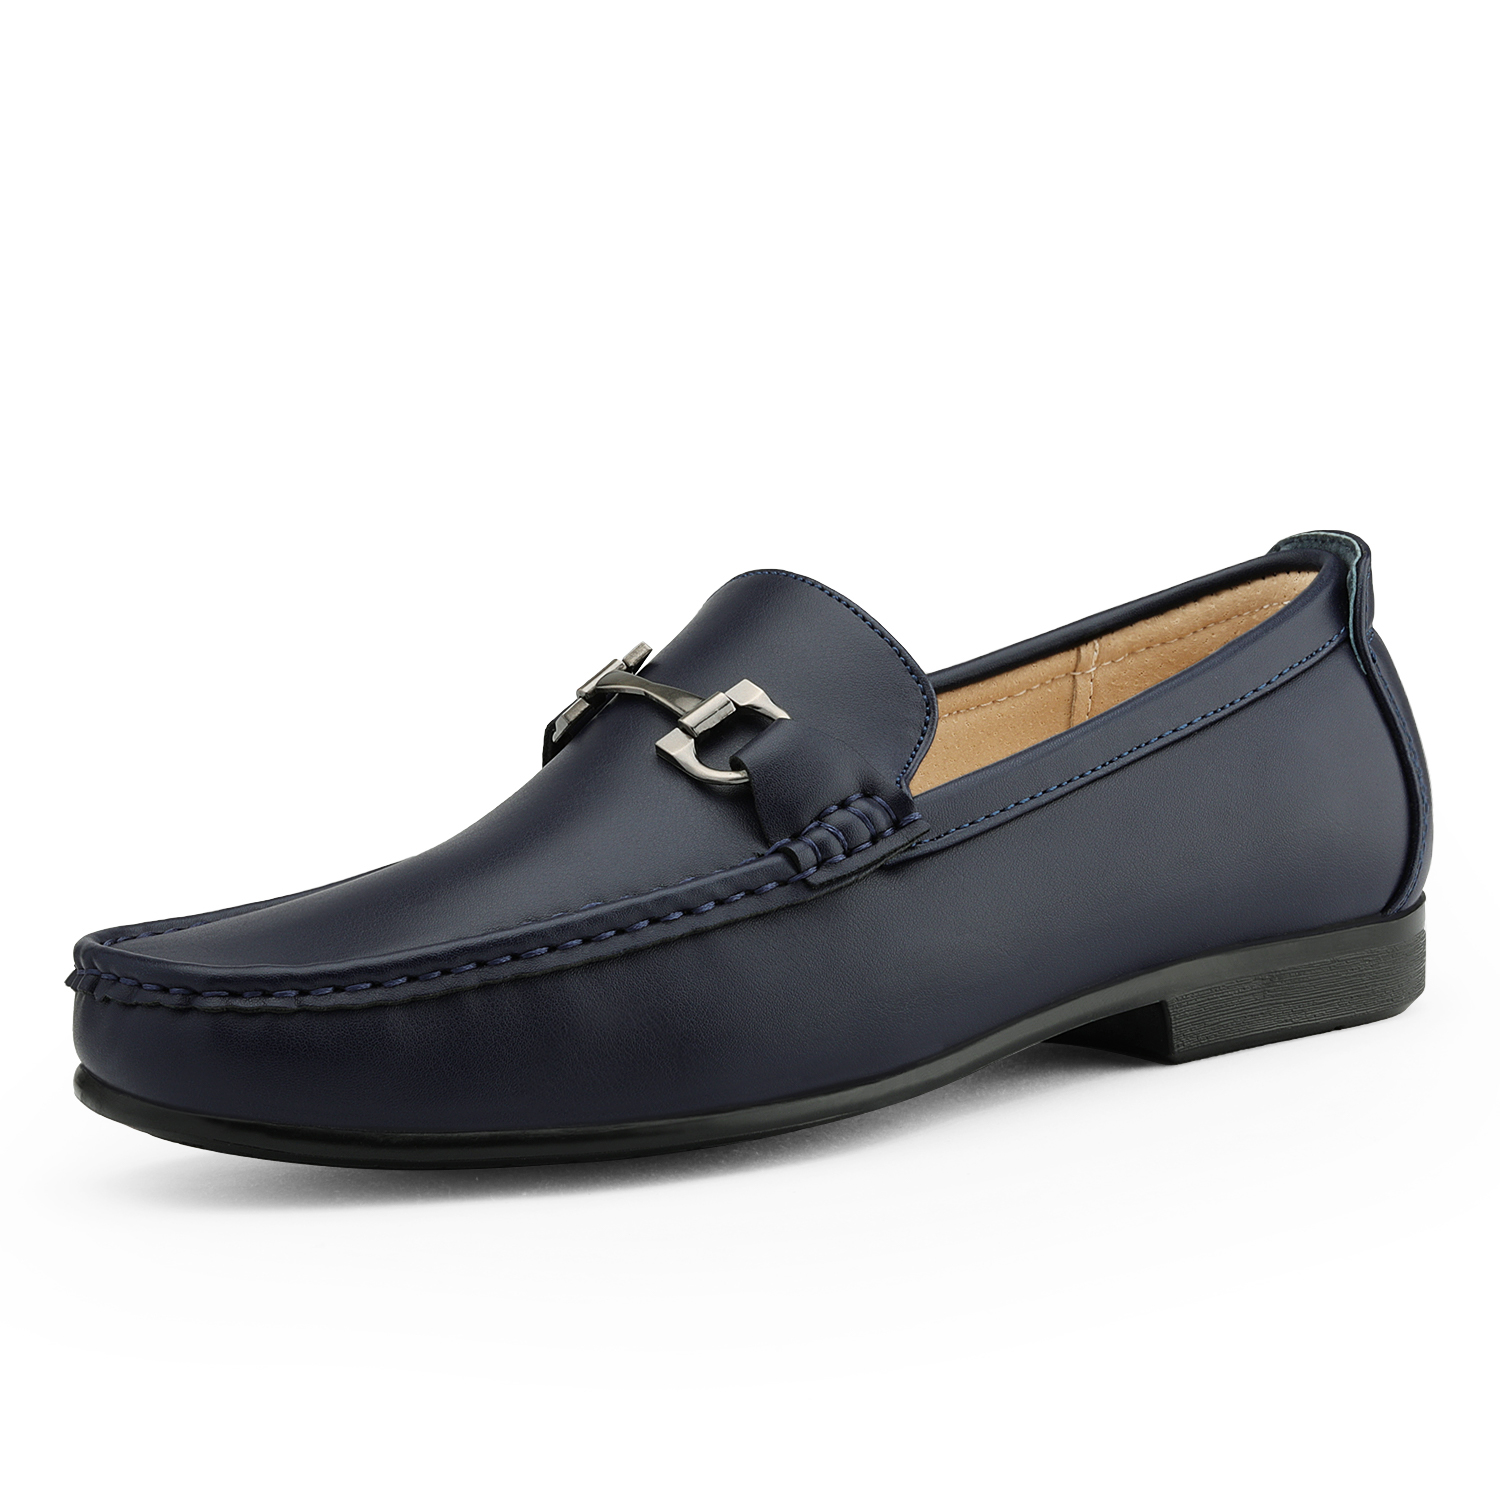 Bruno Marc Men's Moccasin Loafer Shoes Men Dress Loafers Slip On Casual Penny Comfort Outdoor Loafers HENRY-1 NAVY Size 12 - image 1 of 5